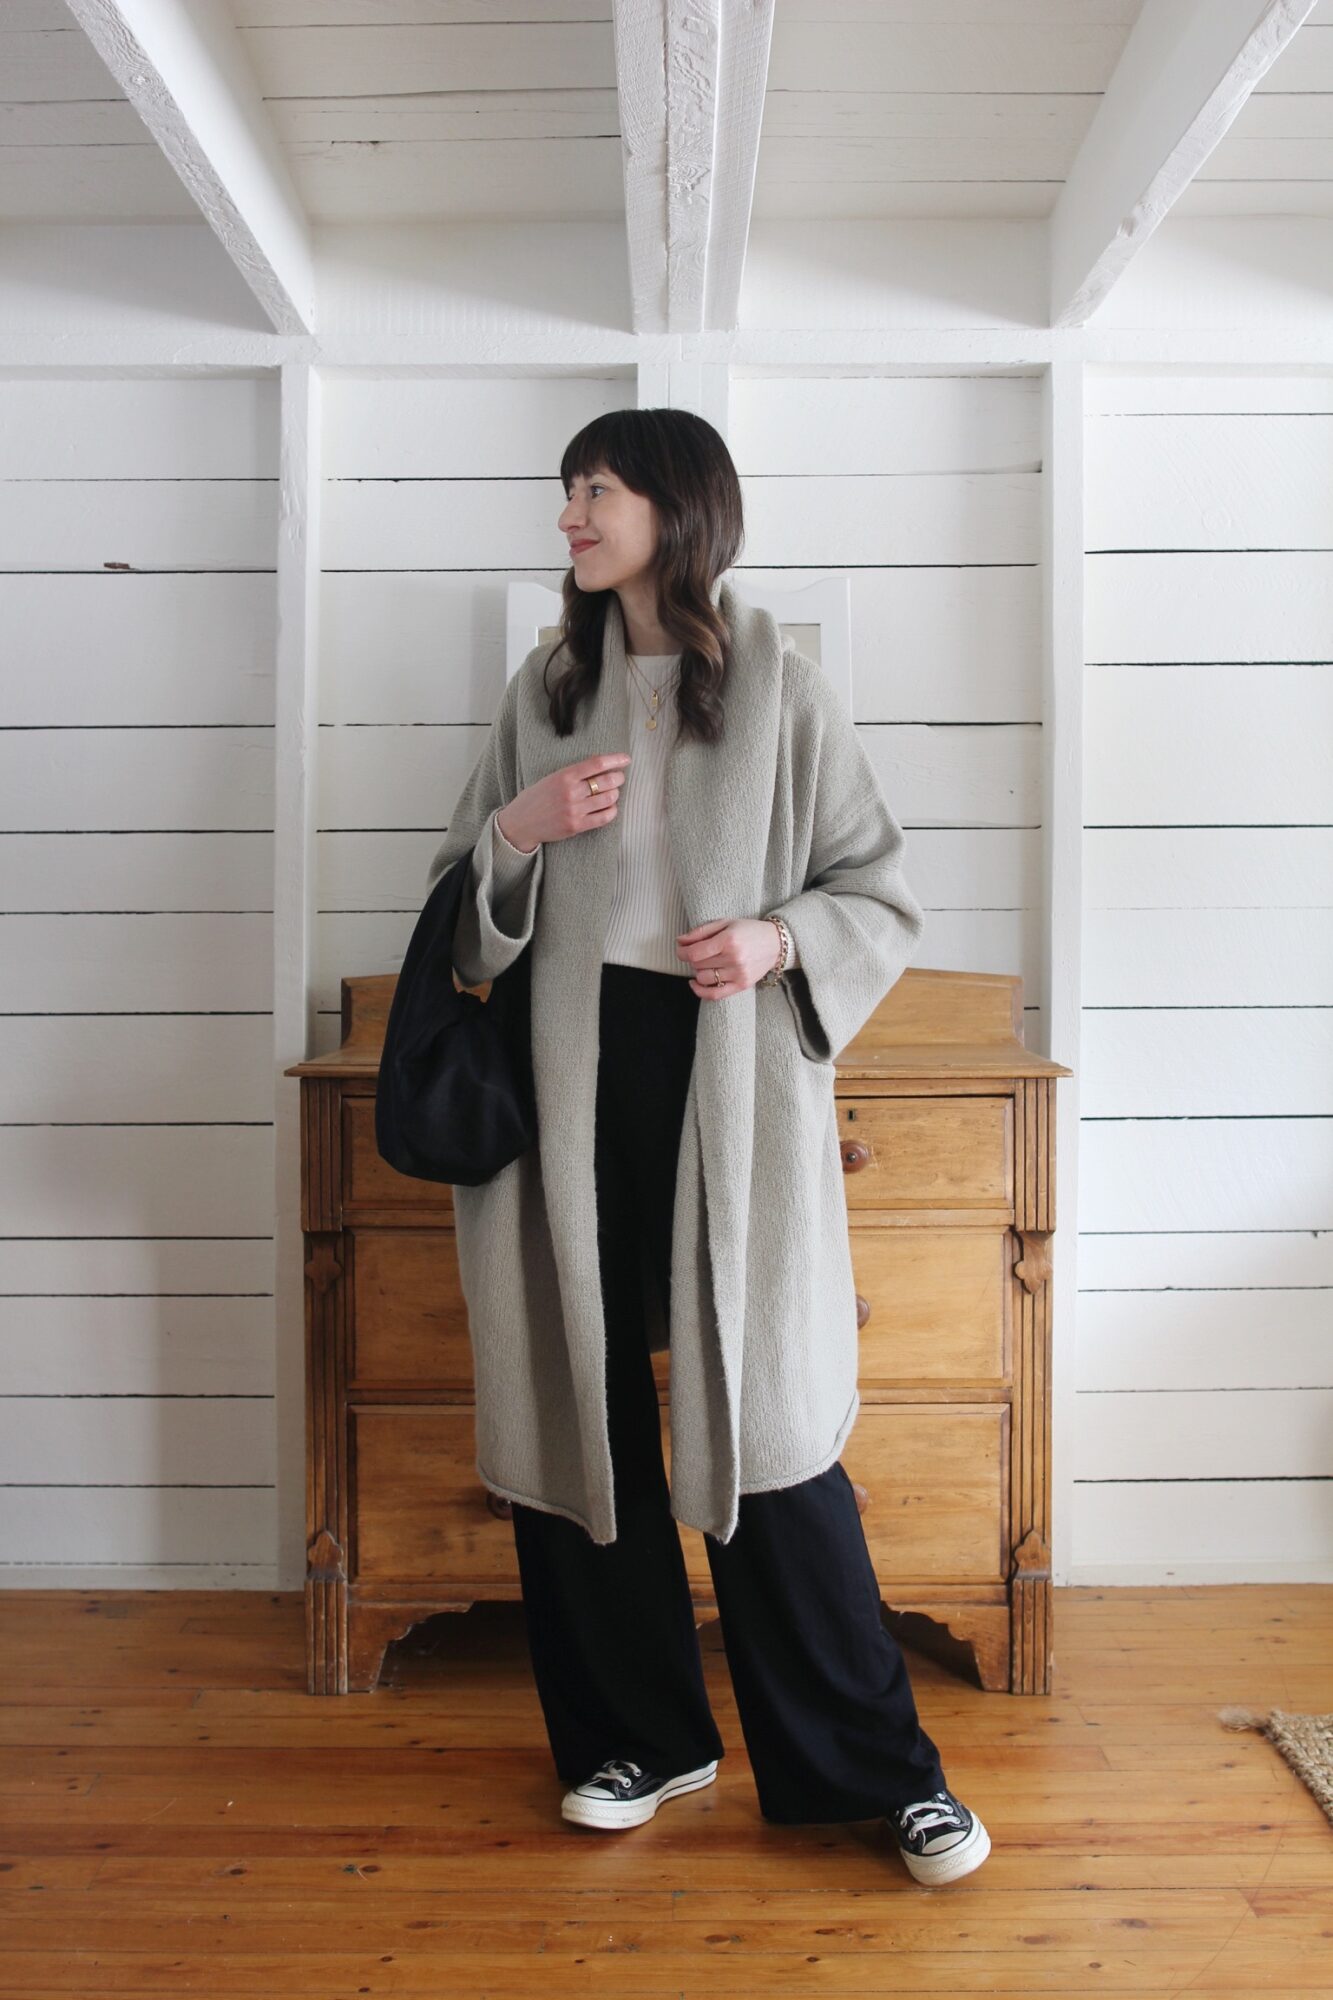 Style Bee - CAPOTE COAT, RIB KNIT, LOUNGE PANTS, CONVERSE AND A KNOT BAG